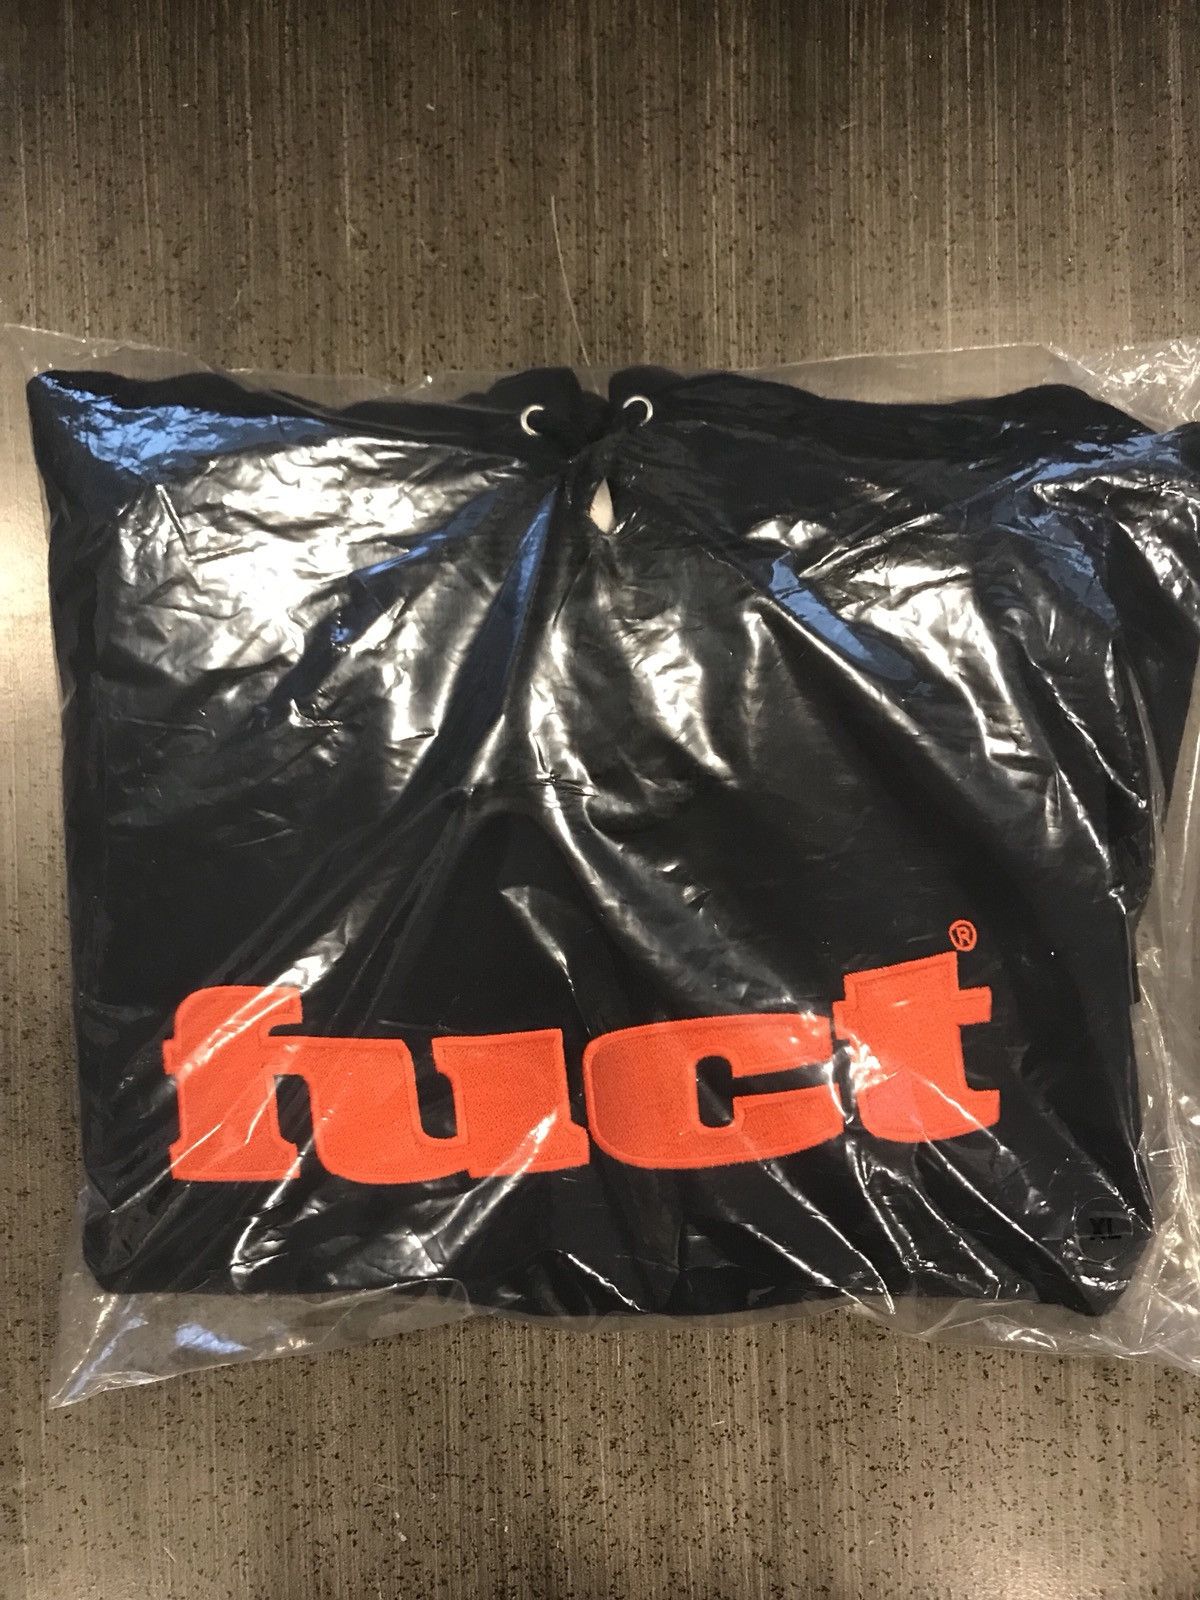 Fuct Fuct Hoodie Size US XL / EU 56 / 4 - 1 Preview